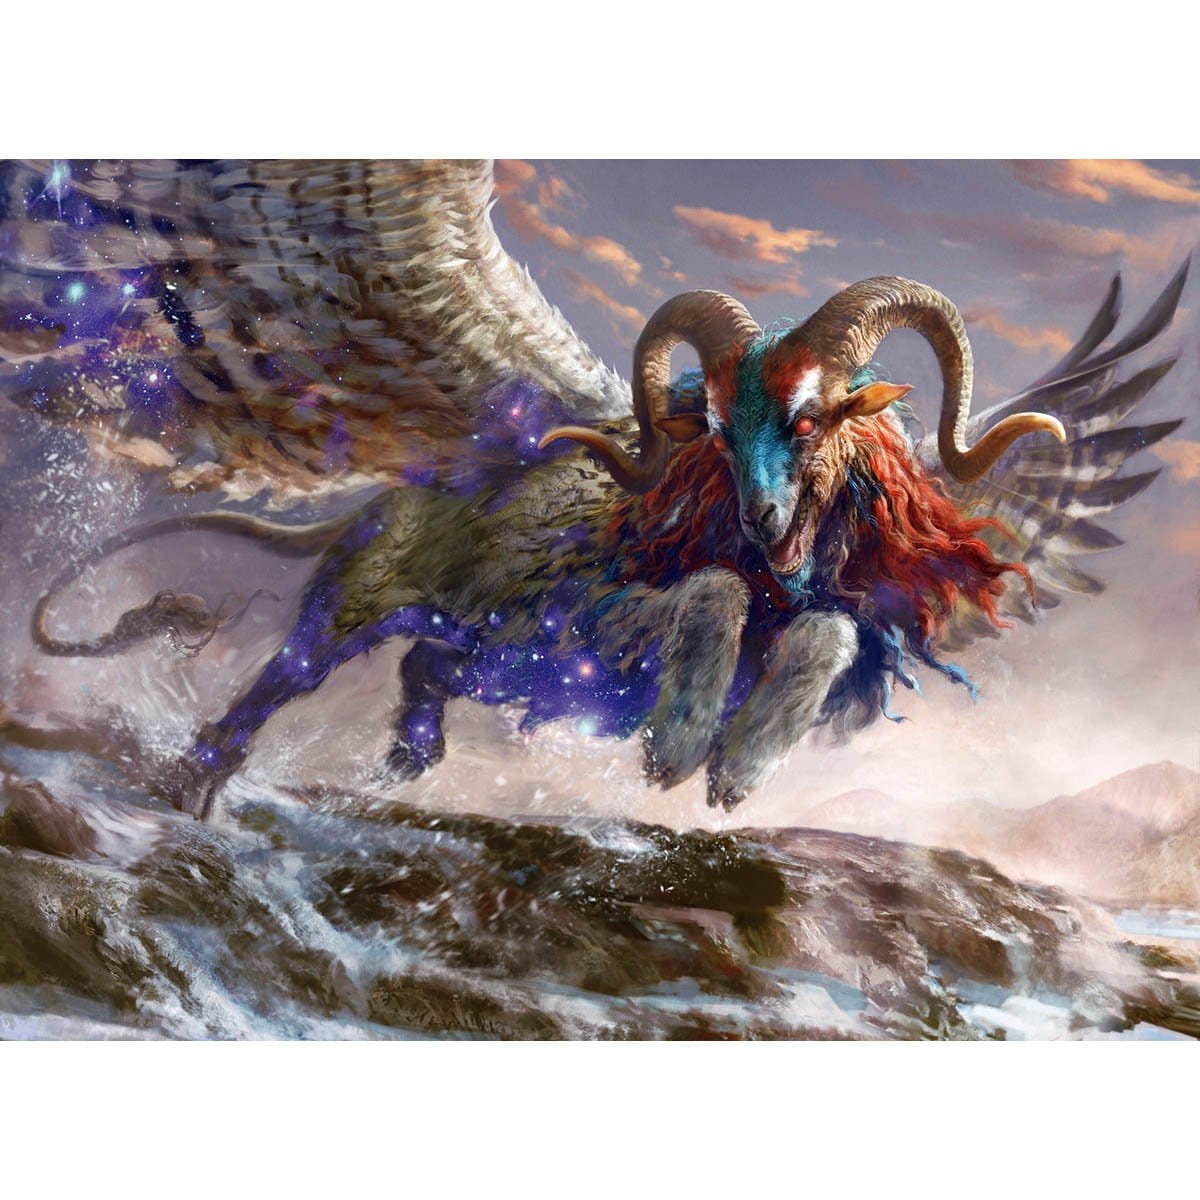 Mischievous Chimera Print - Print - Original Magic Art - Accessories for Magic the Gathering and other card games